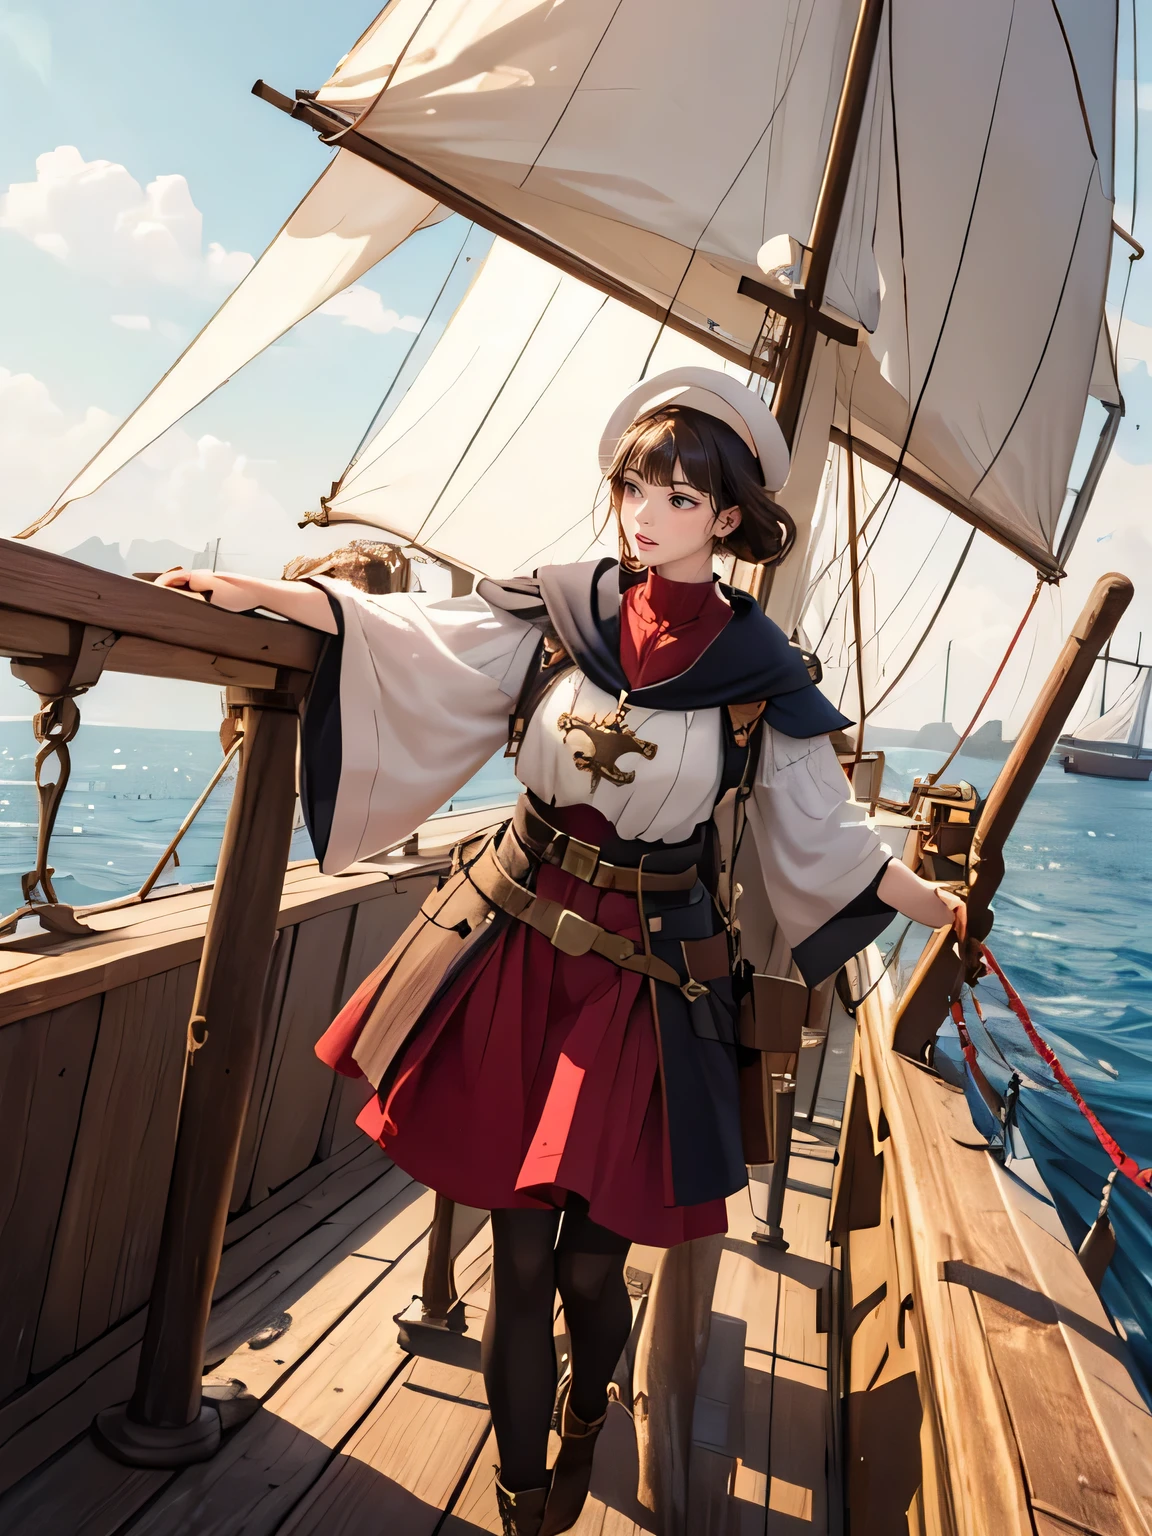 (medieval world), medieval European aristocratic dress, large galleon, on the deck of a medieval sailing ship during the Age of Discovery in the Middle Ages, sailors, a lot of cargo, 